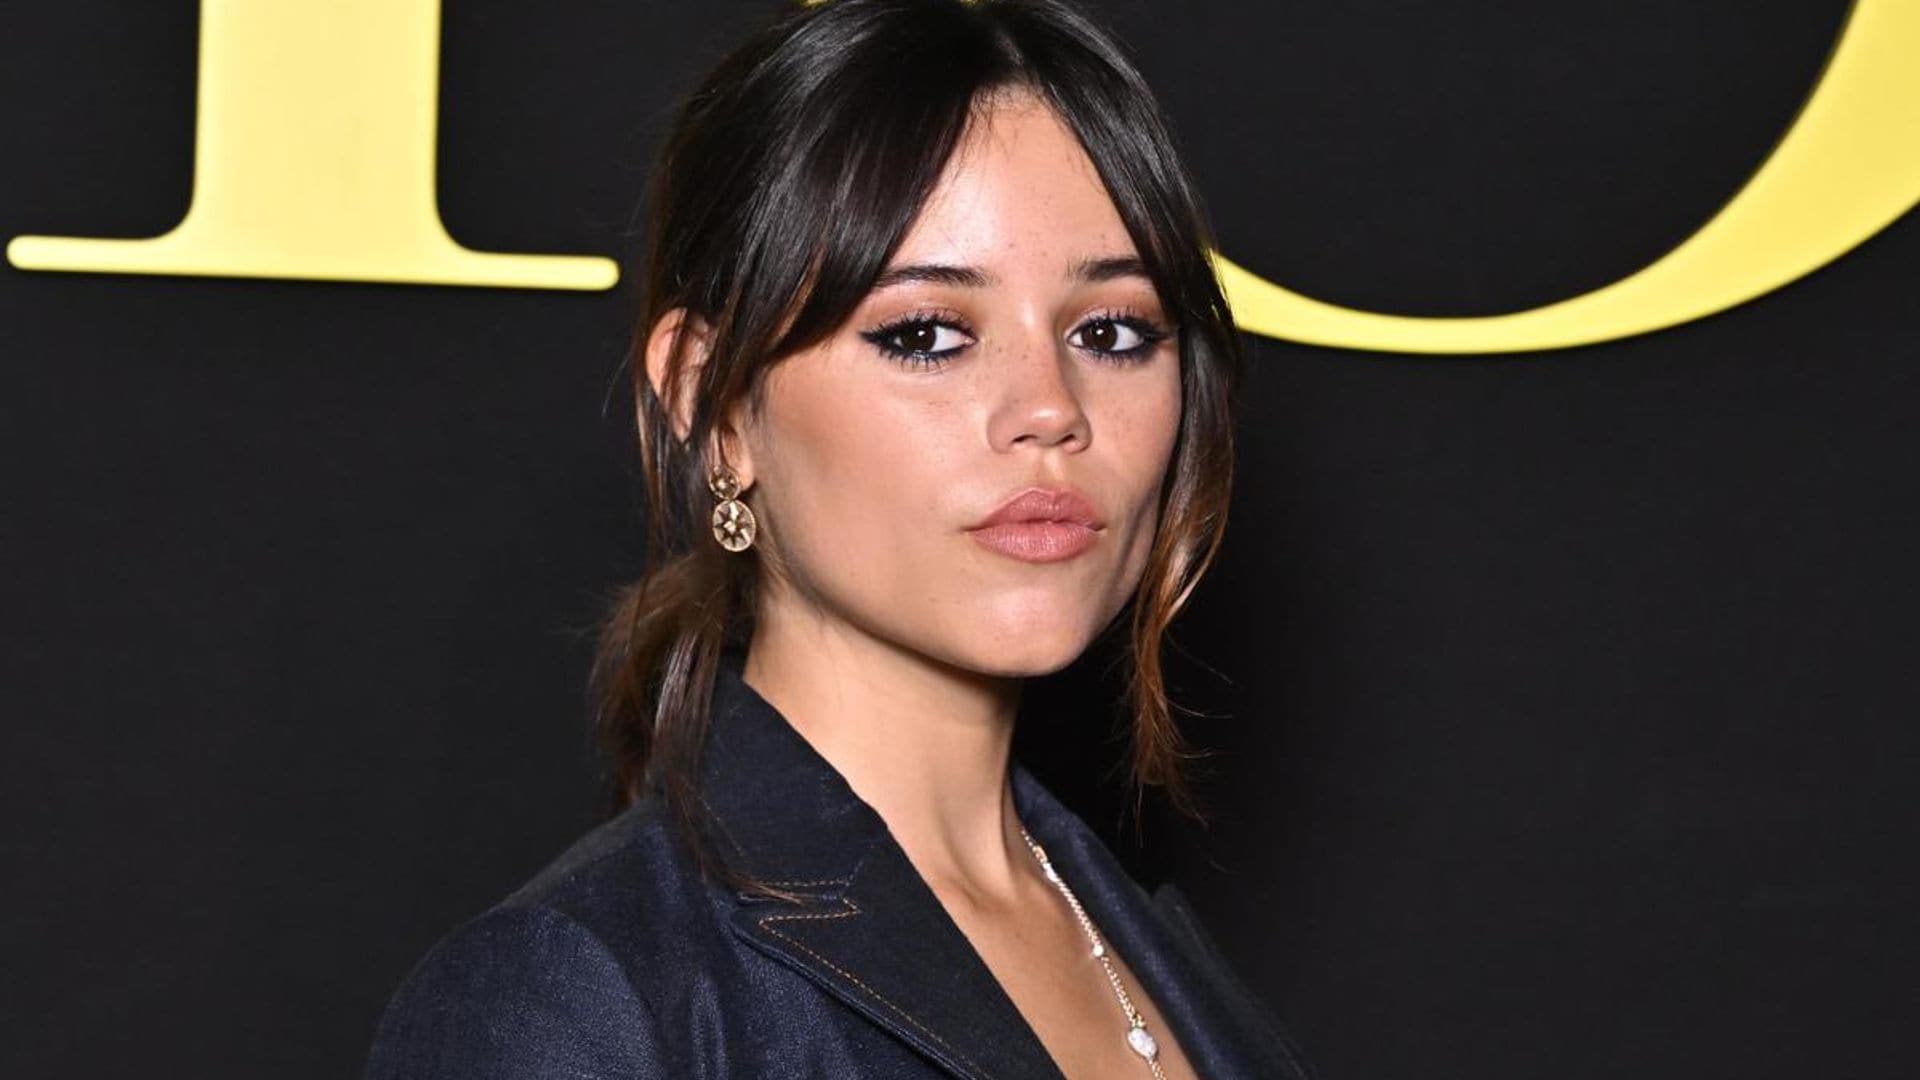 Jenna Ortega talks about her ‘Beetlejuice’ role and playing Winona Ryder’s daughter